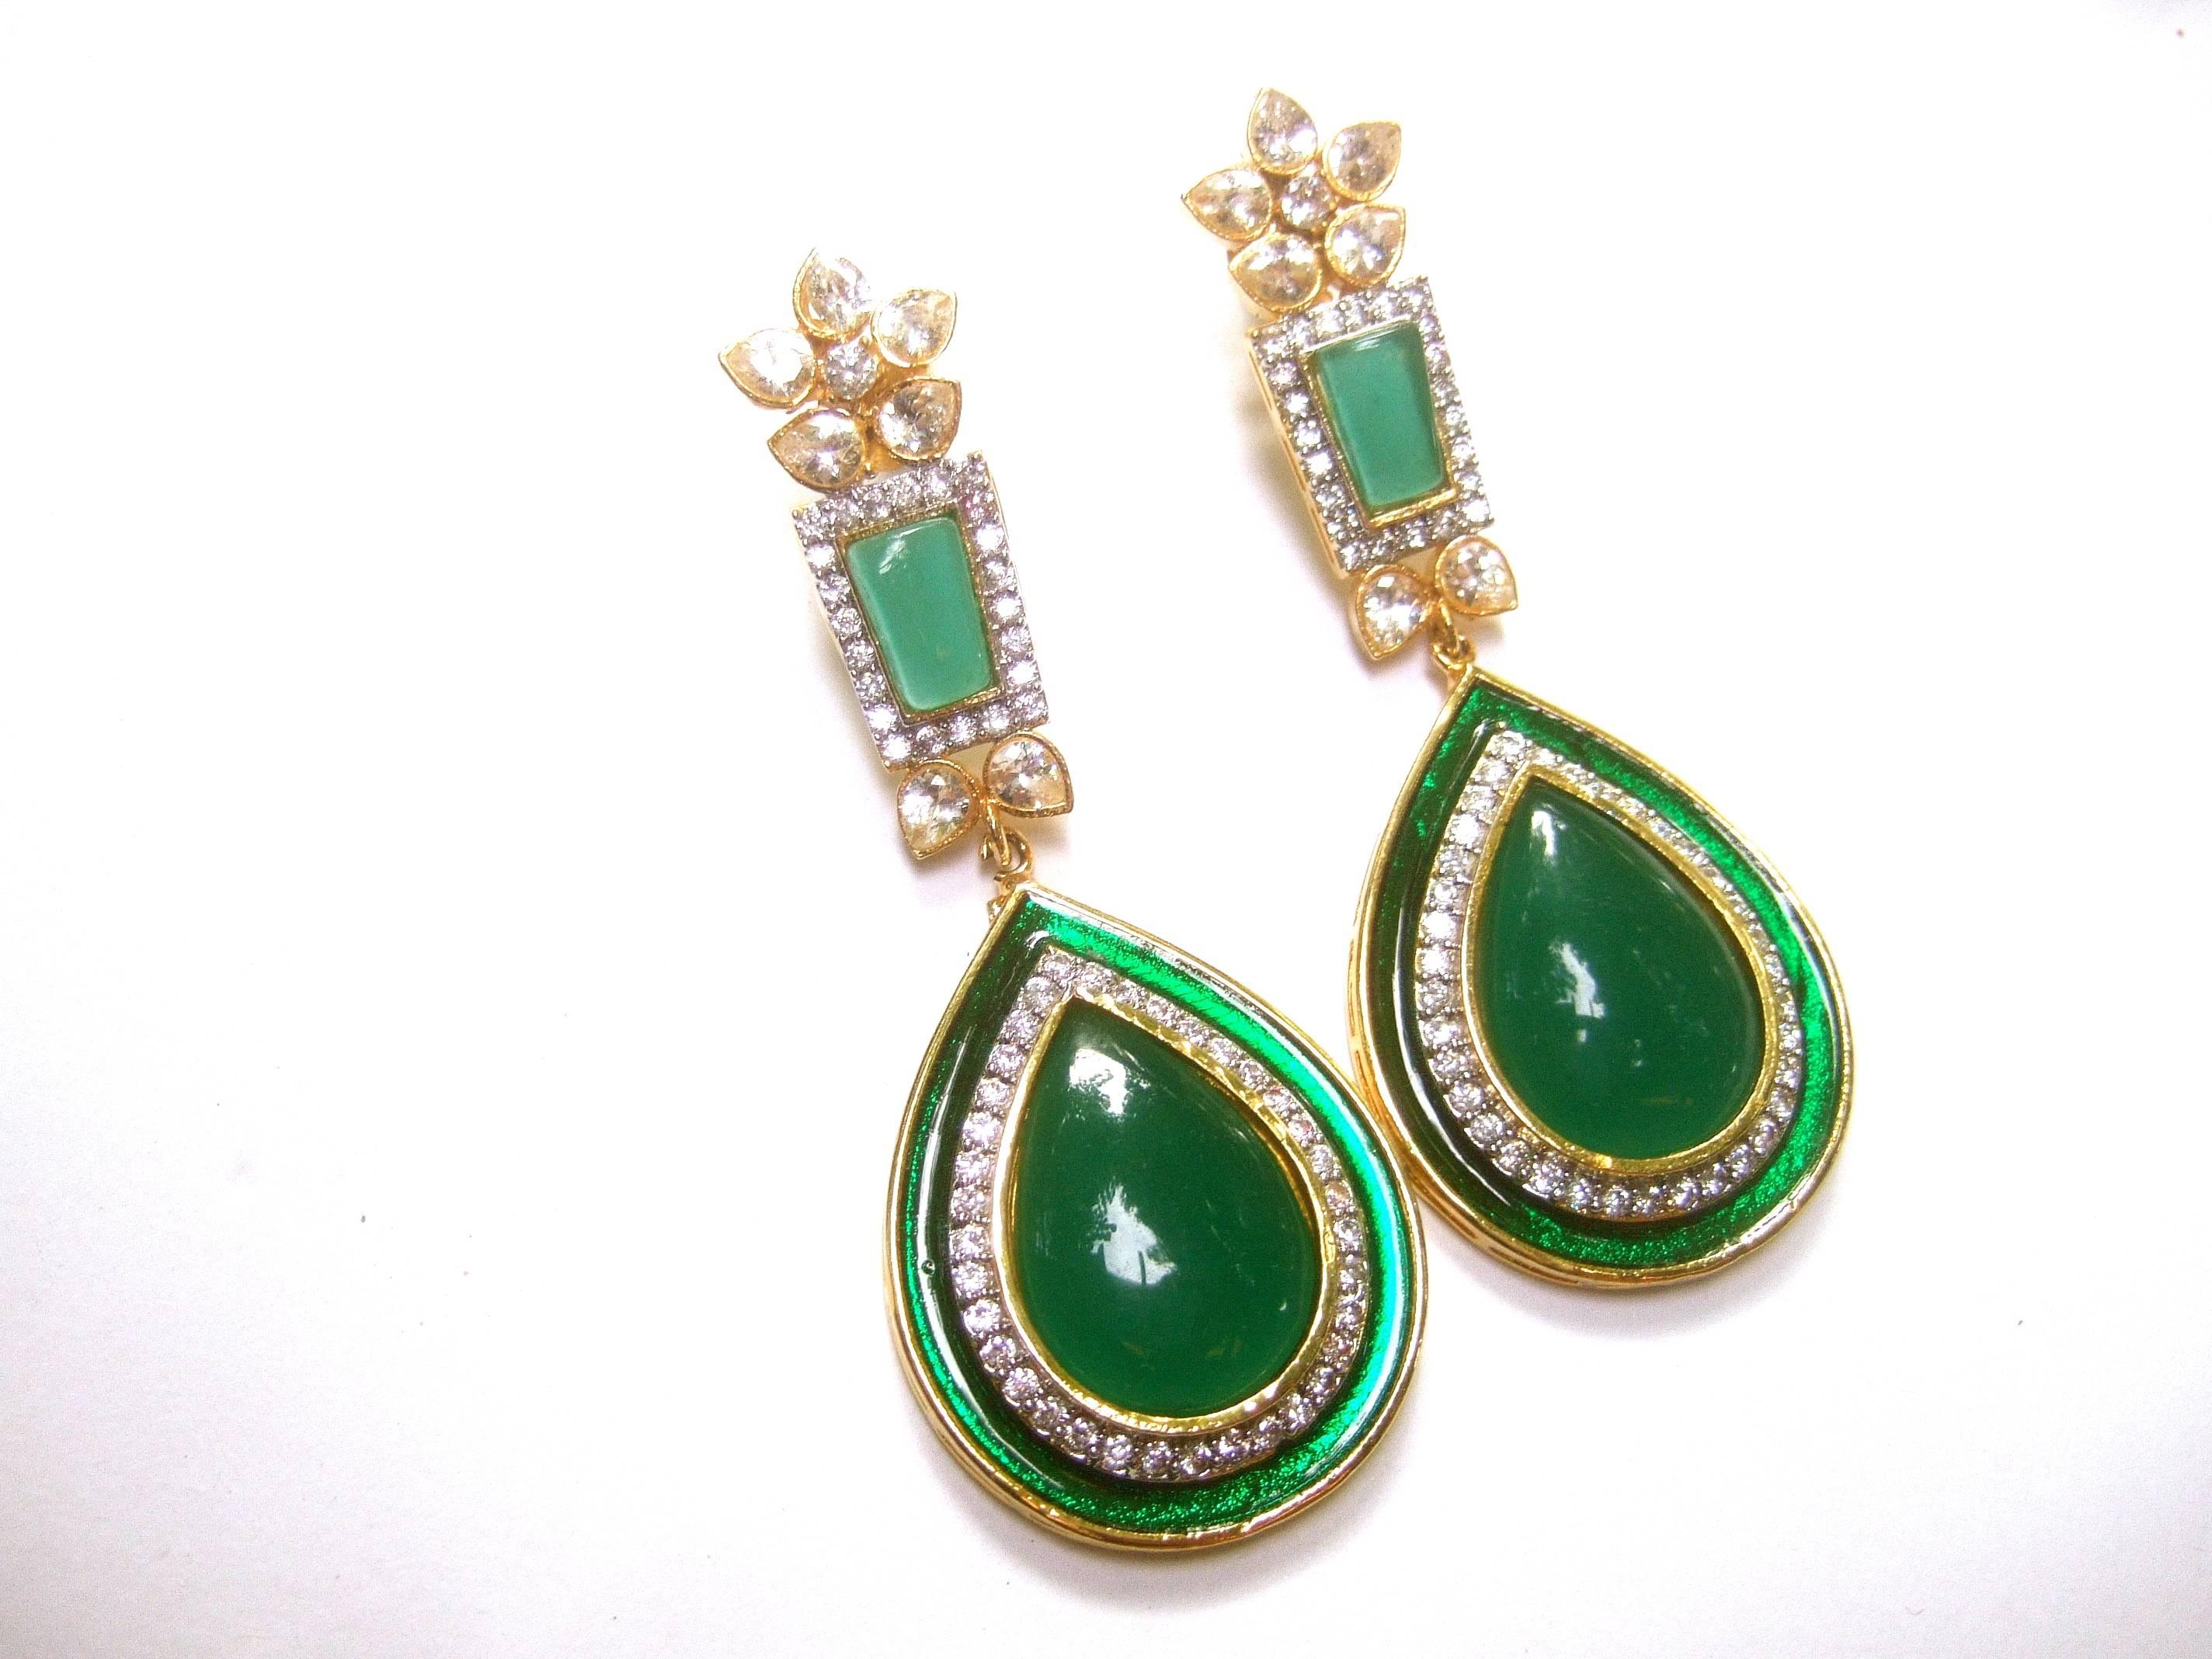 Exquisite Emerald Green Poured Glass Tear Drop Crystal Earrings  5